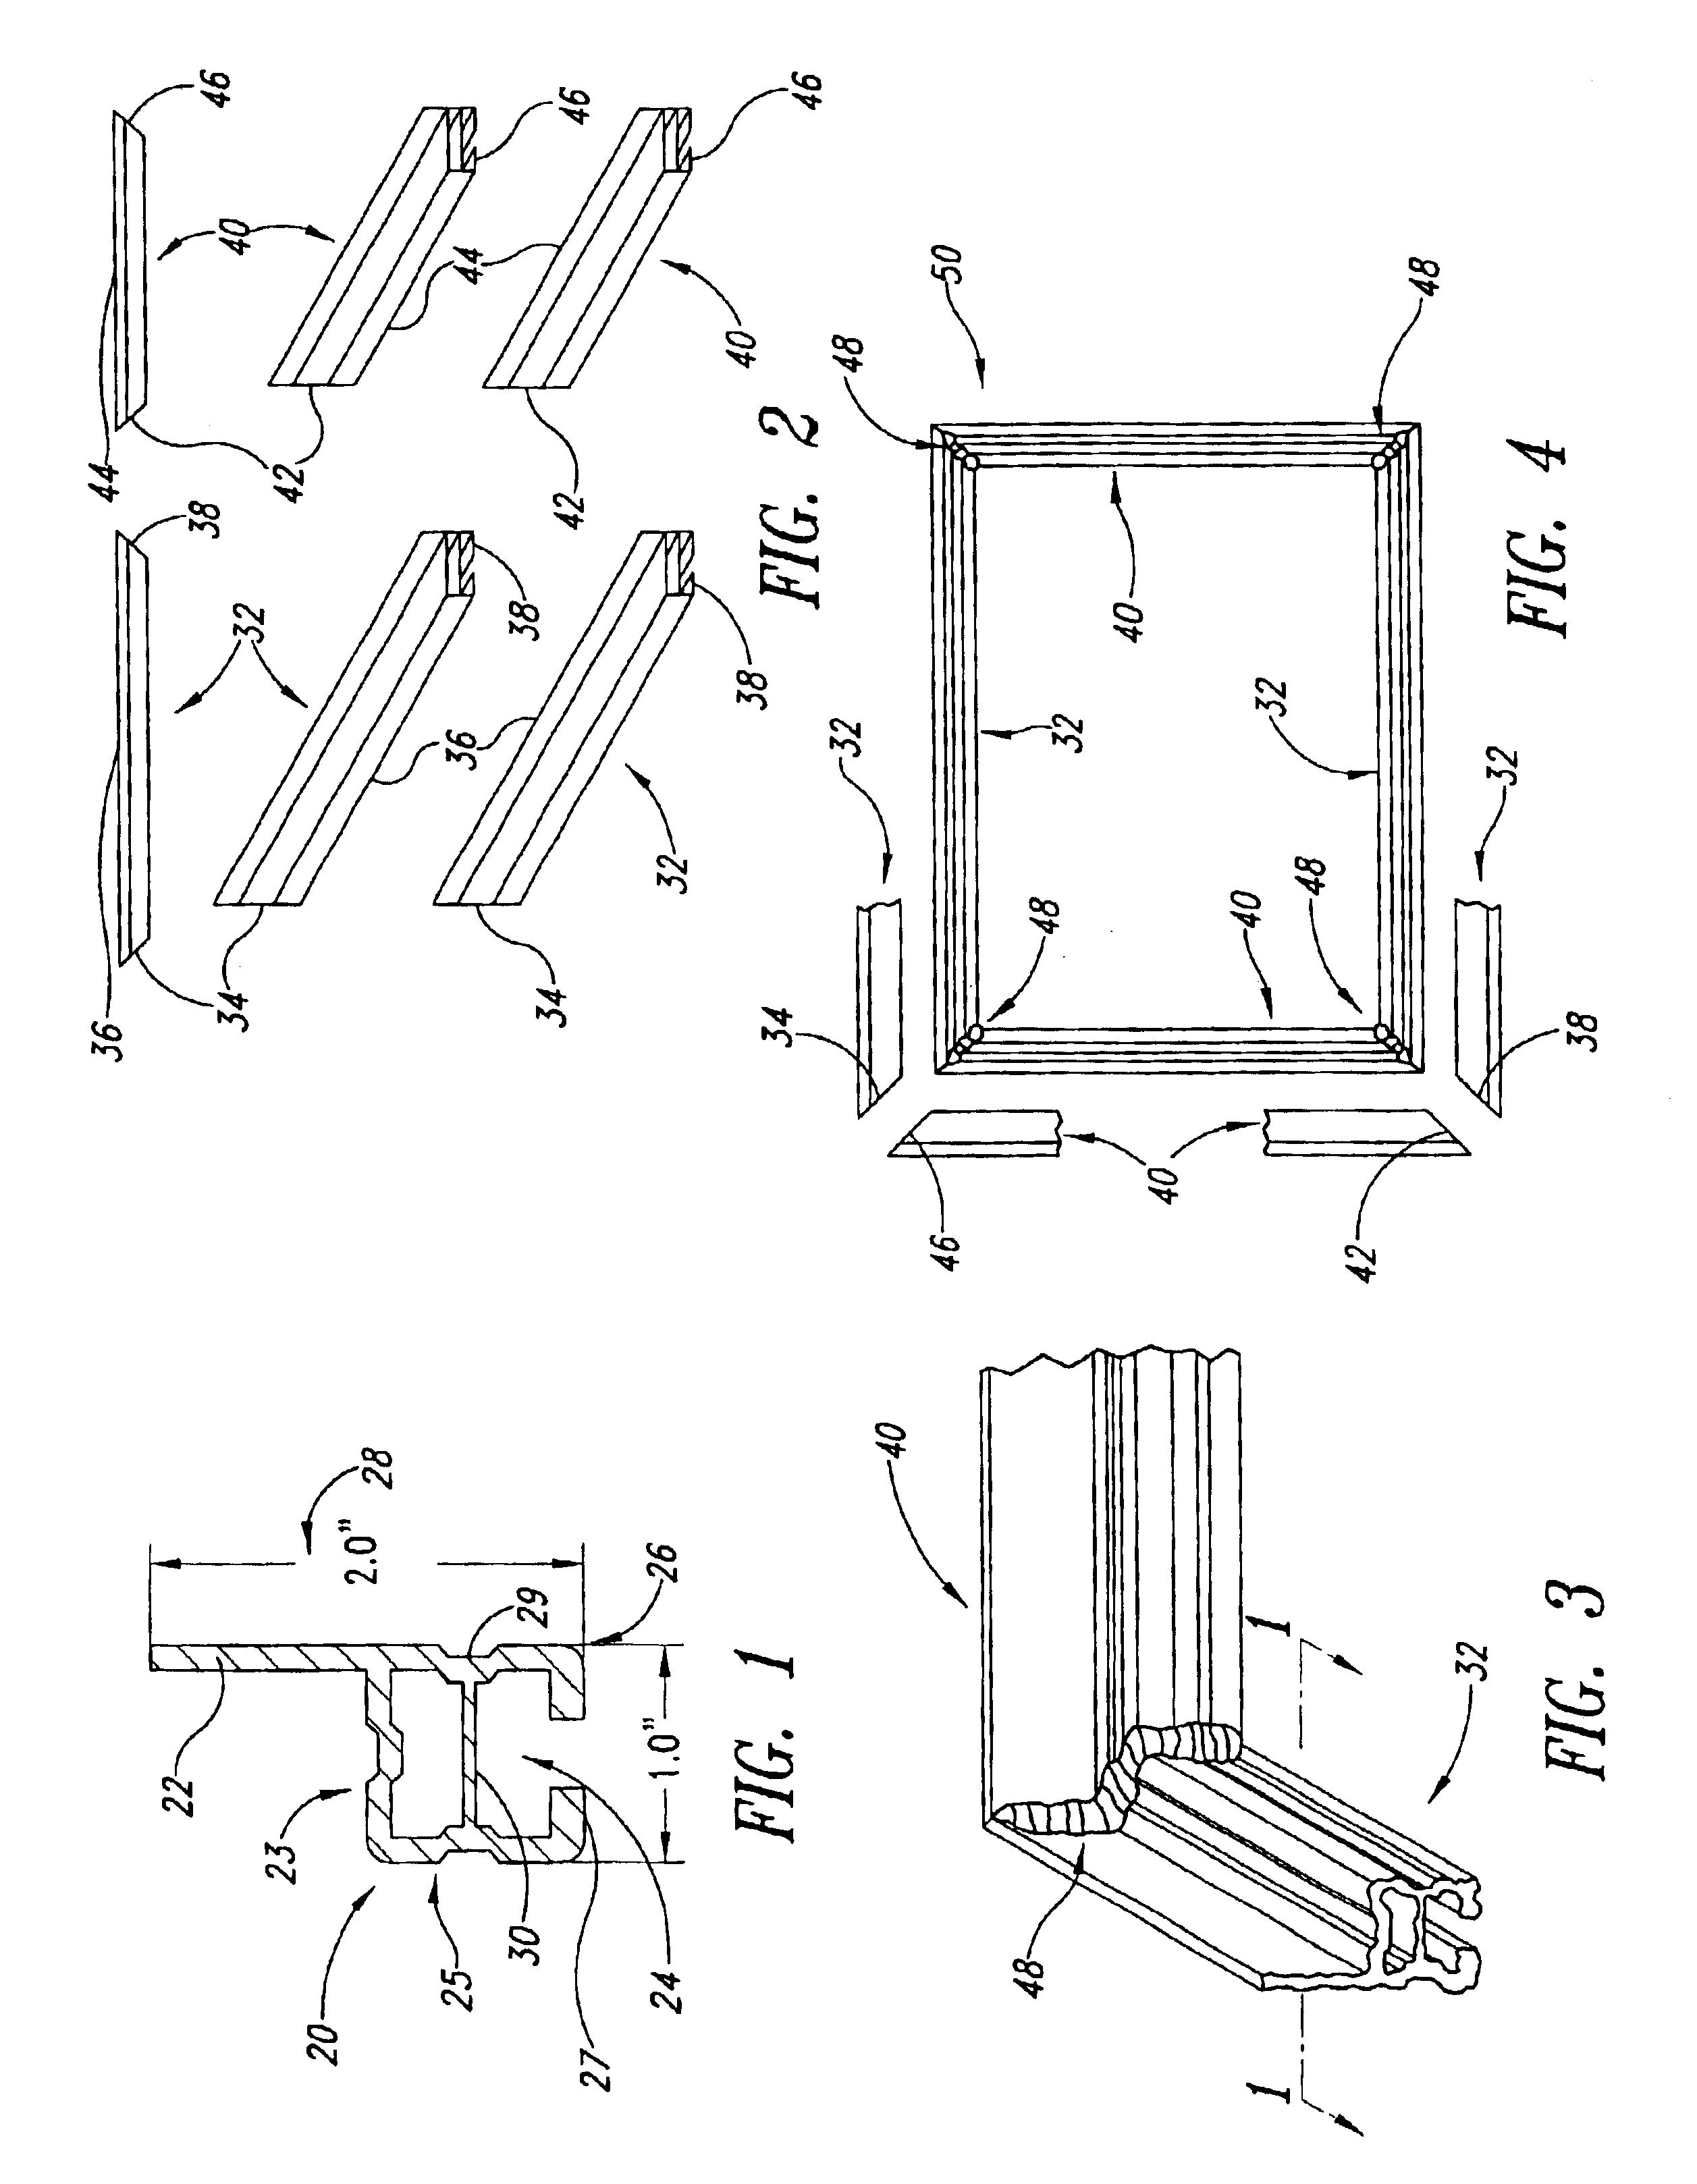 Method of attaching canvas to a frame